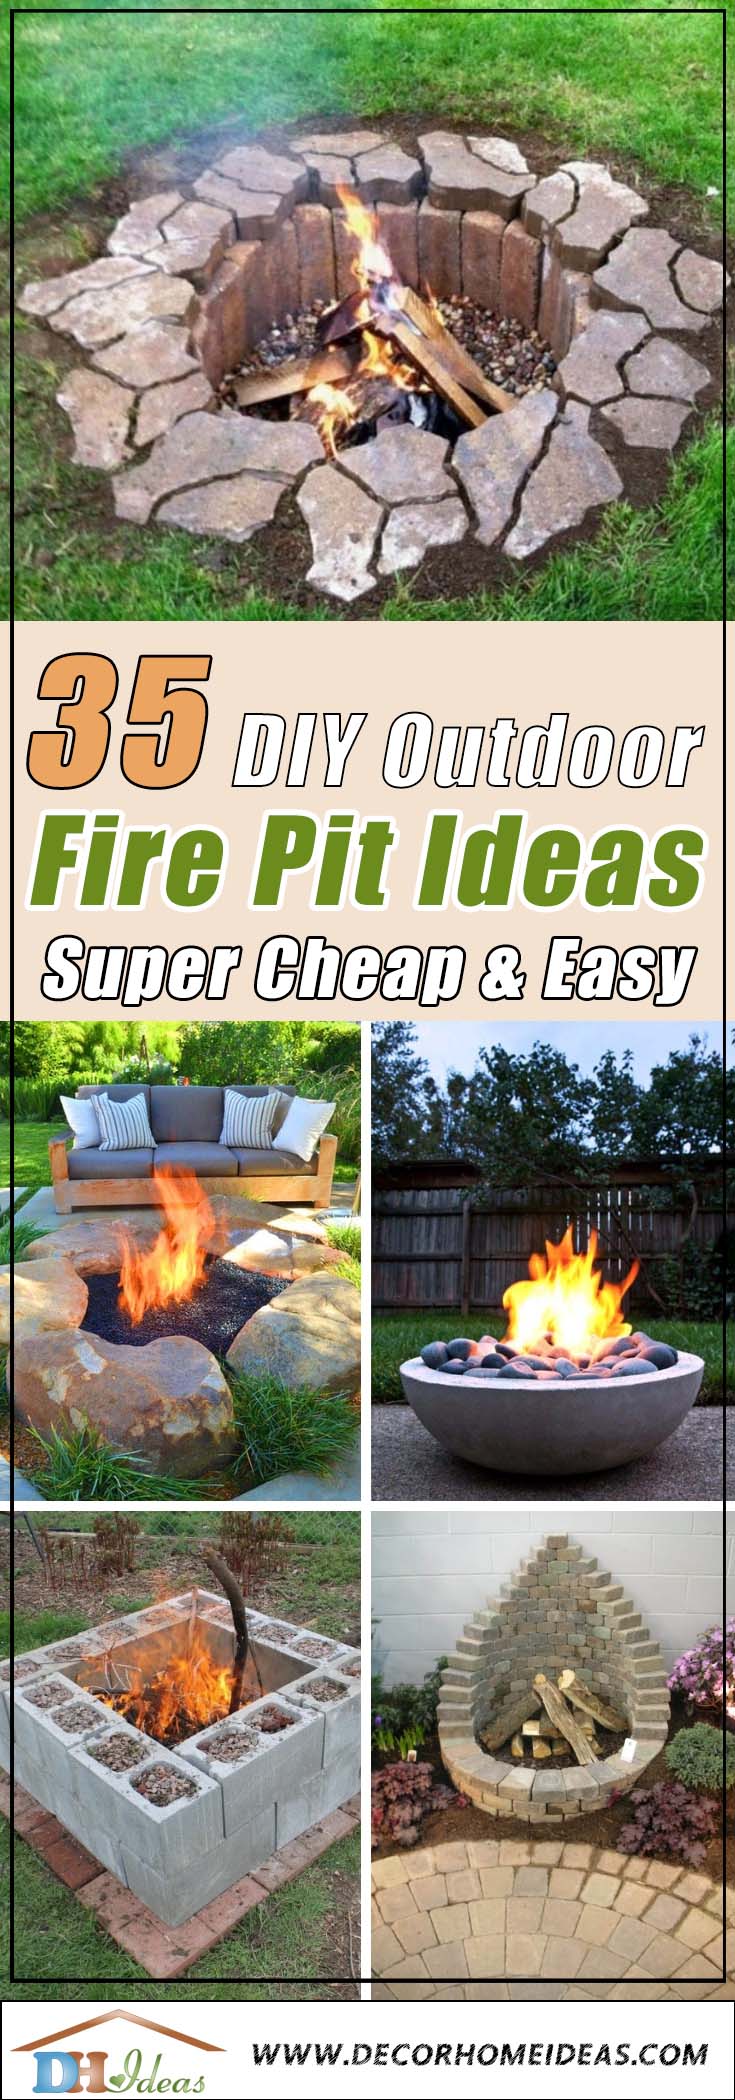 35 Easy To Do Fire Pit Ideas And, Building A Backyard Fire Pit Area